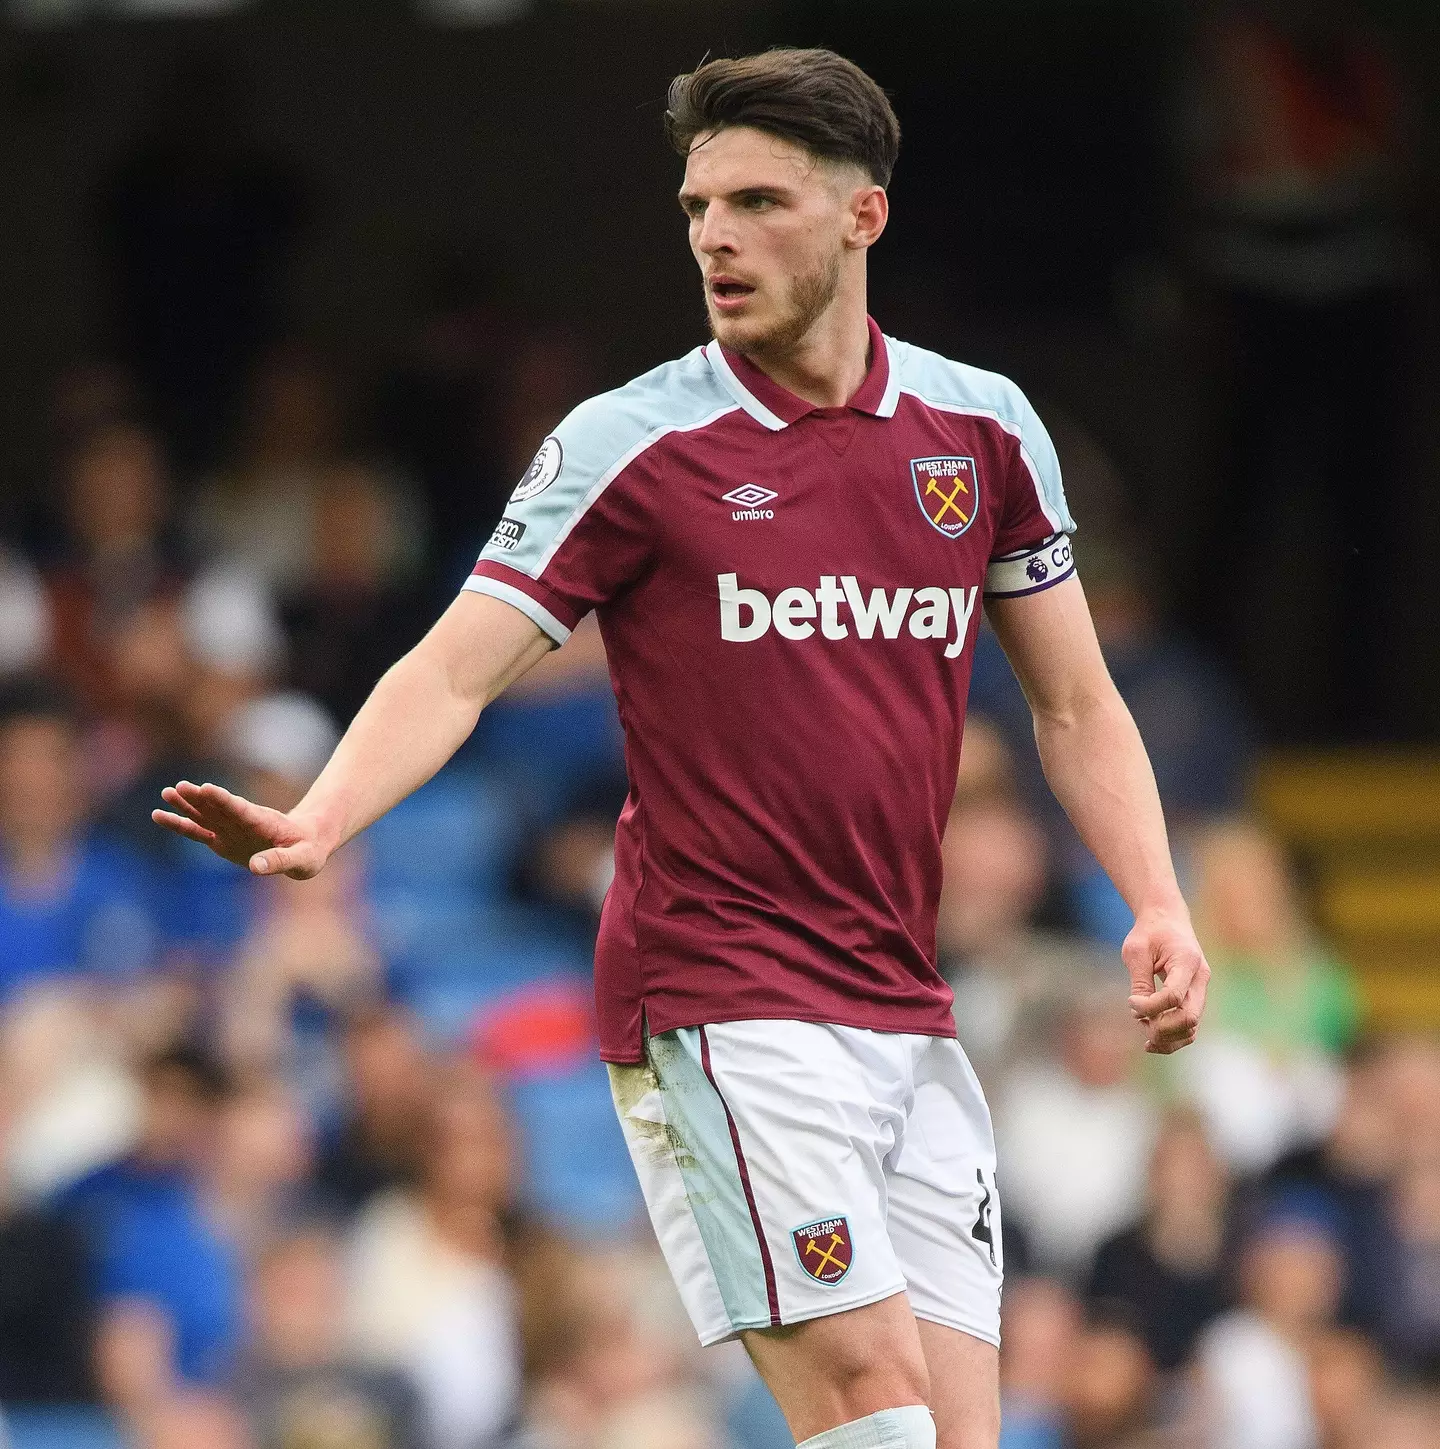 Rice has reportedly rejected a contract offer at West Ham (Image: PA)